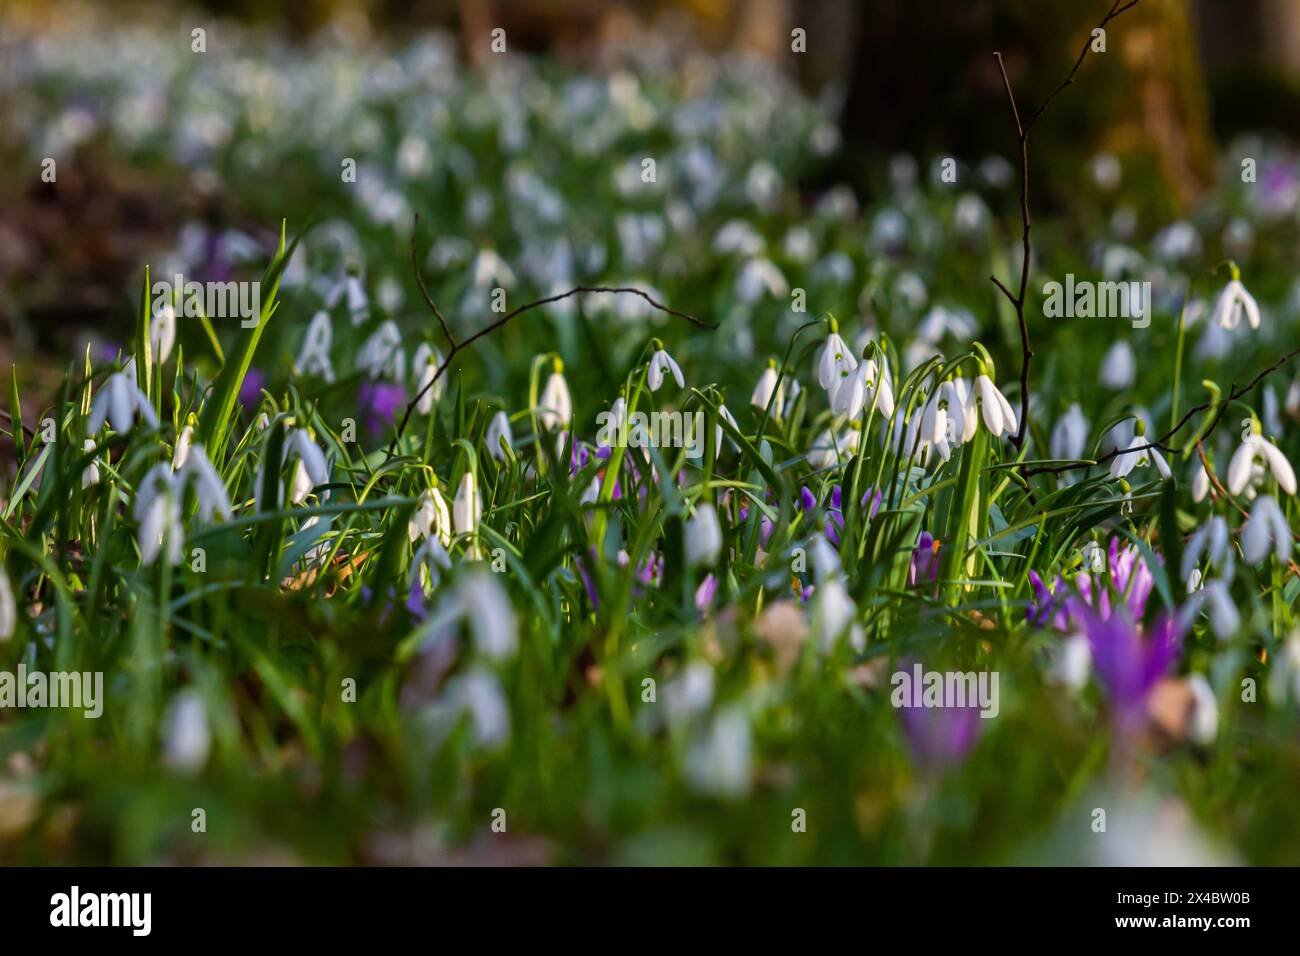 White snowdrop flowers. Galanthus blossoms illuminated by the sun in the green blurred background, early spring. Galanthus nivalis bulbous, perennial Stock Photo